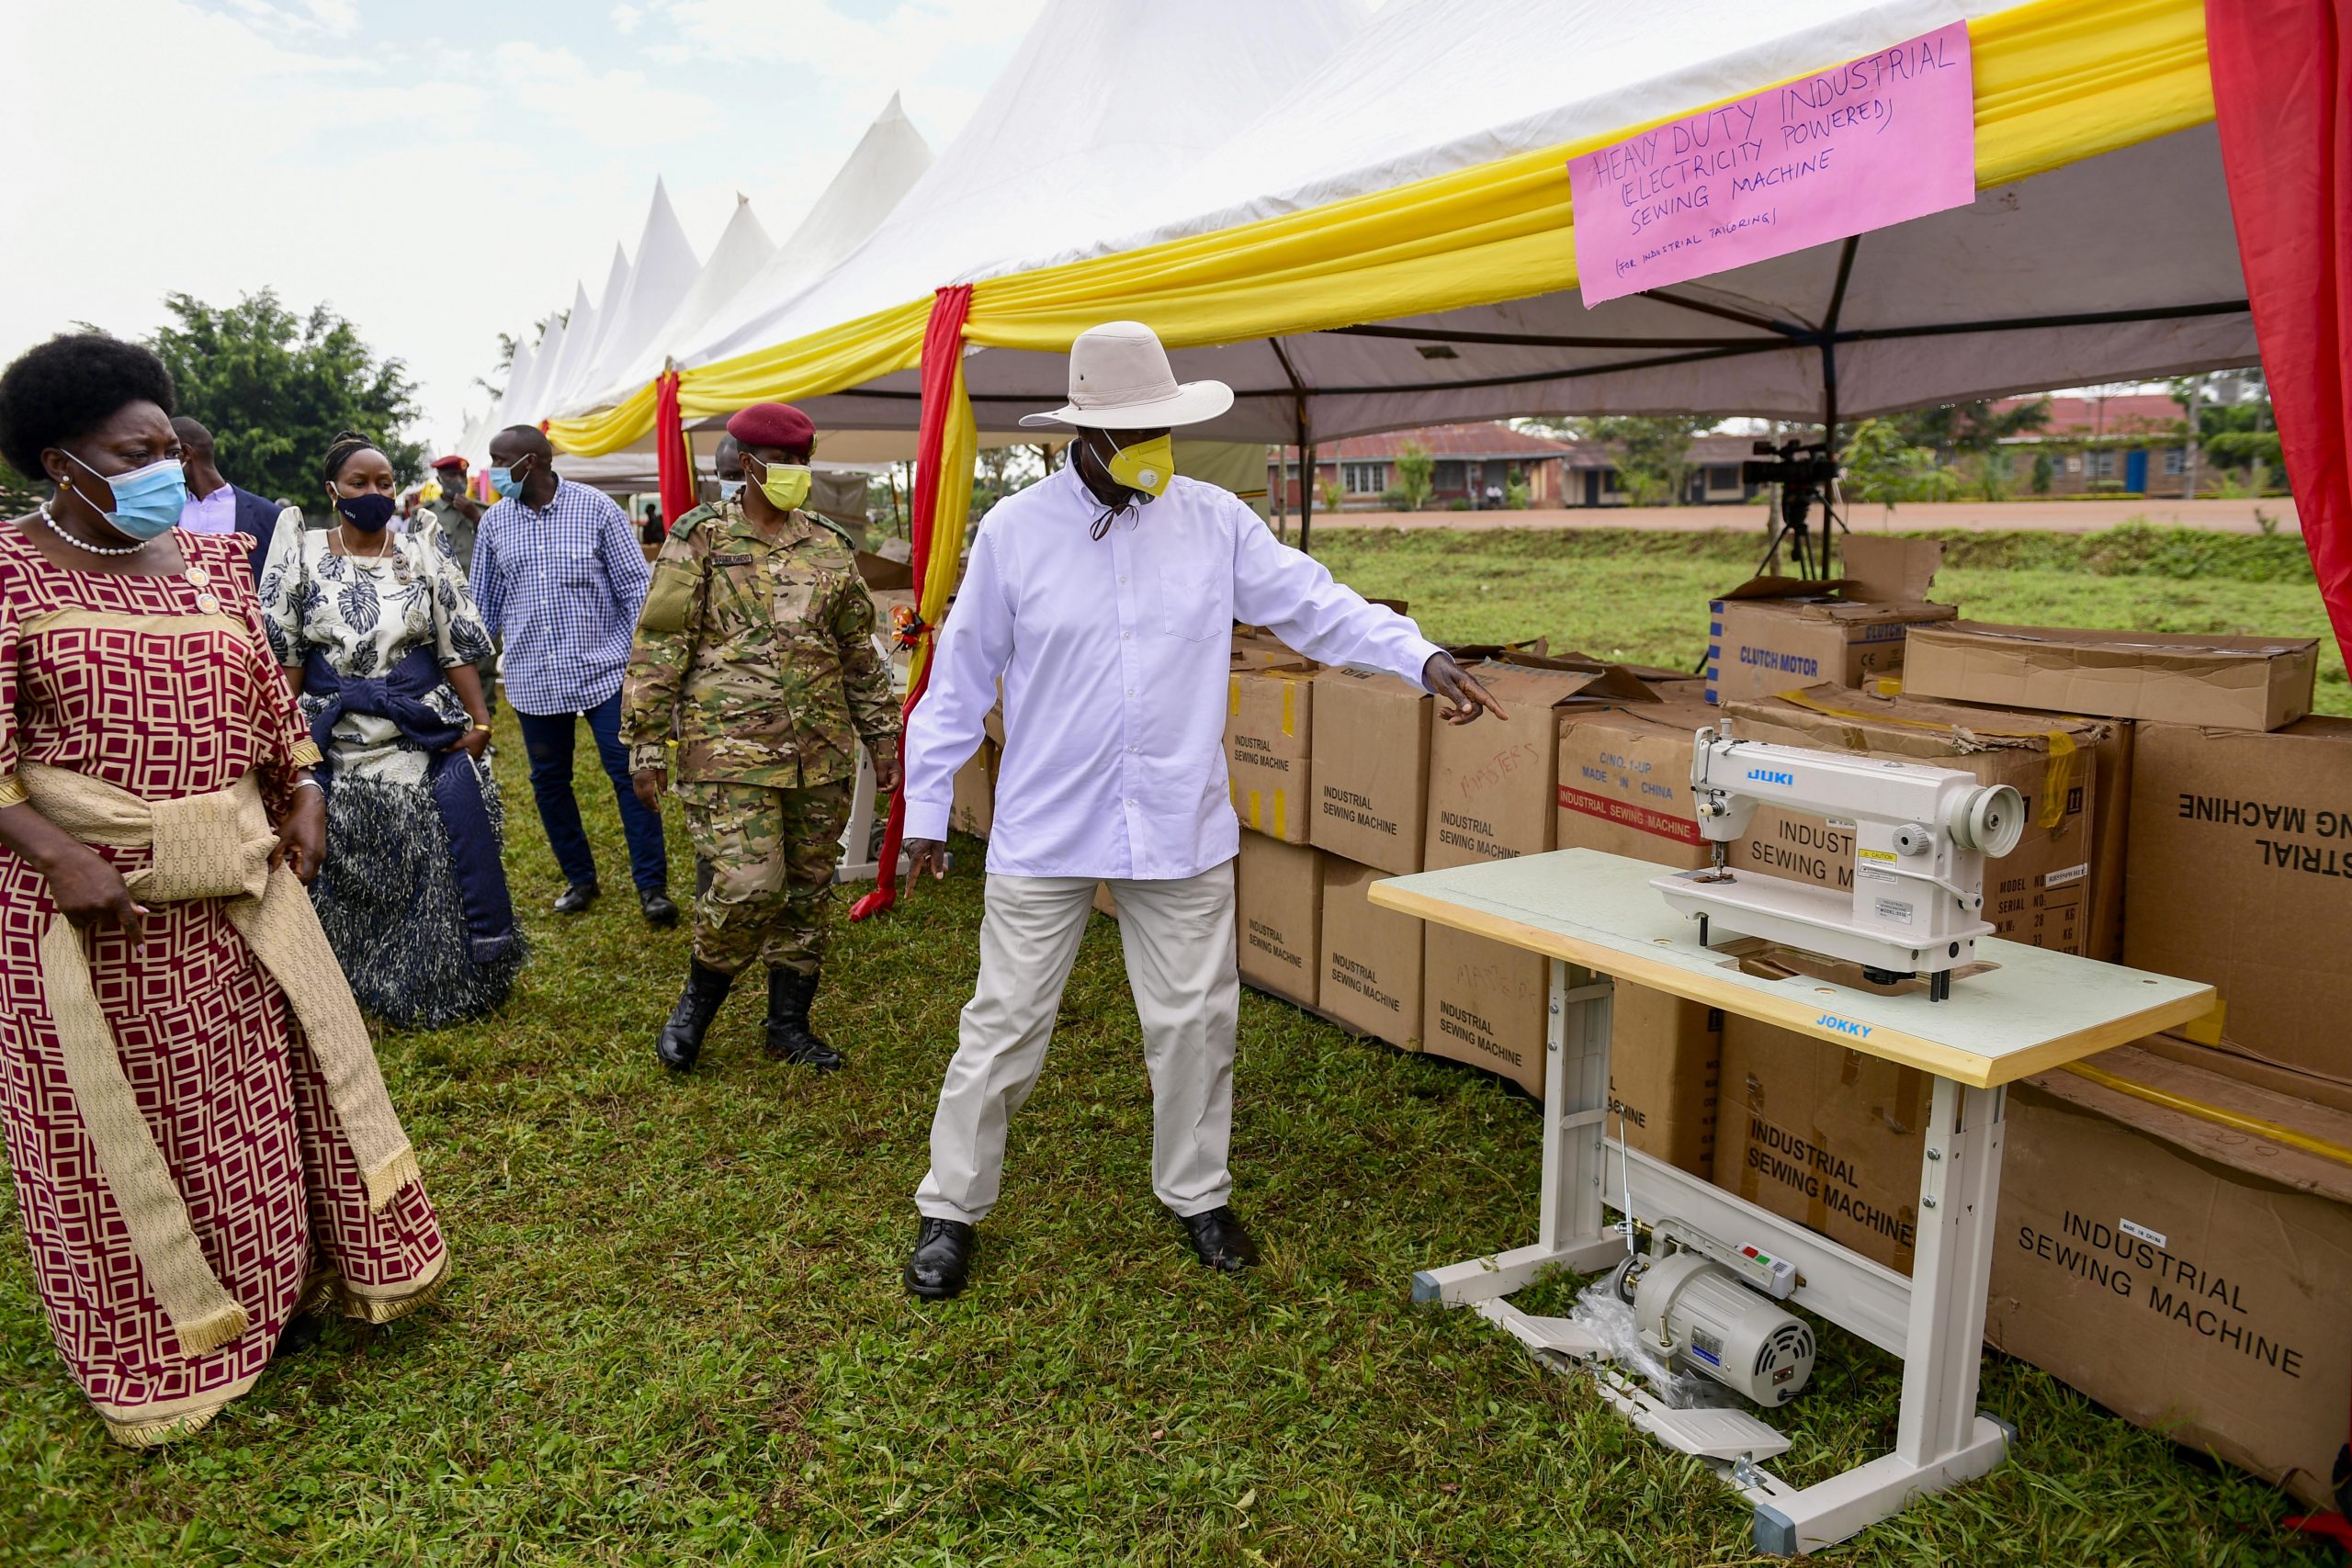 MUSEVENI AND SPEAKER INSPECT BUSINESS START UP TOOL KITS